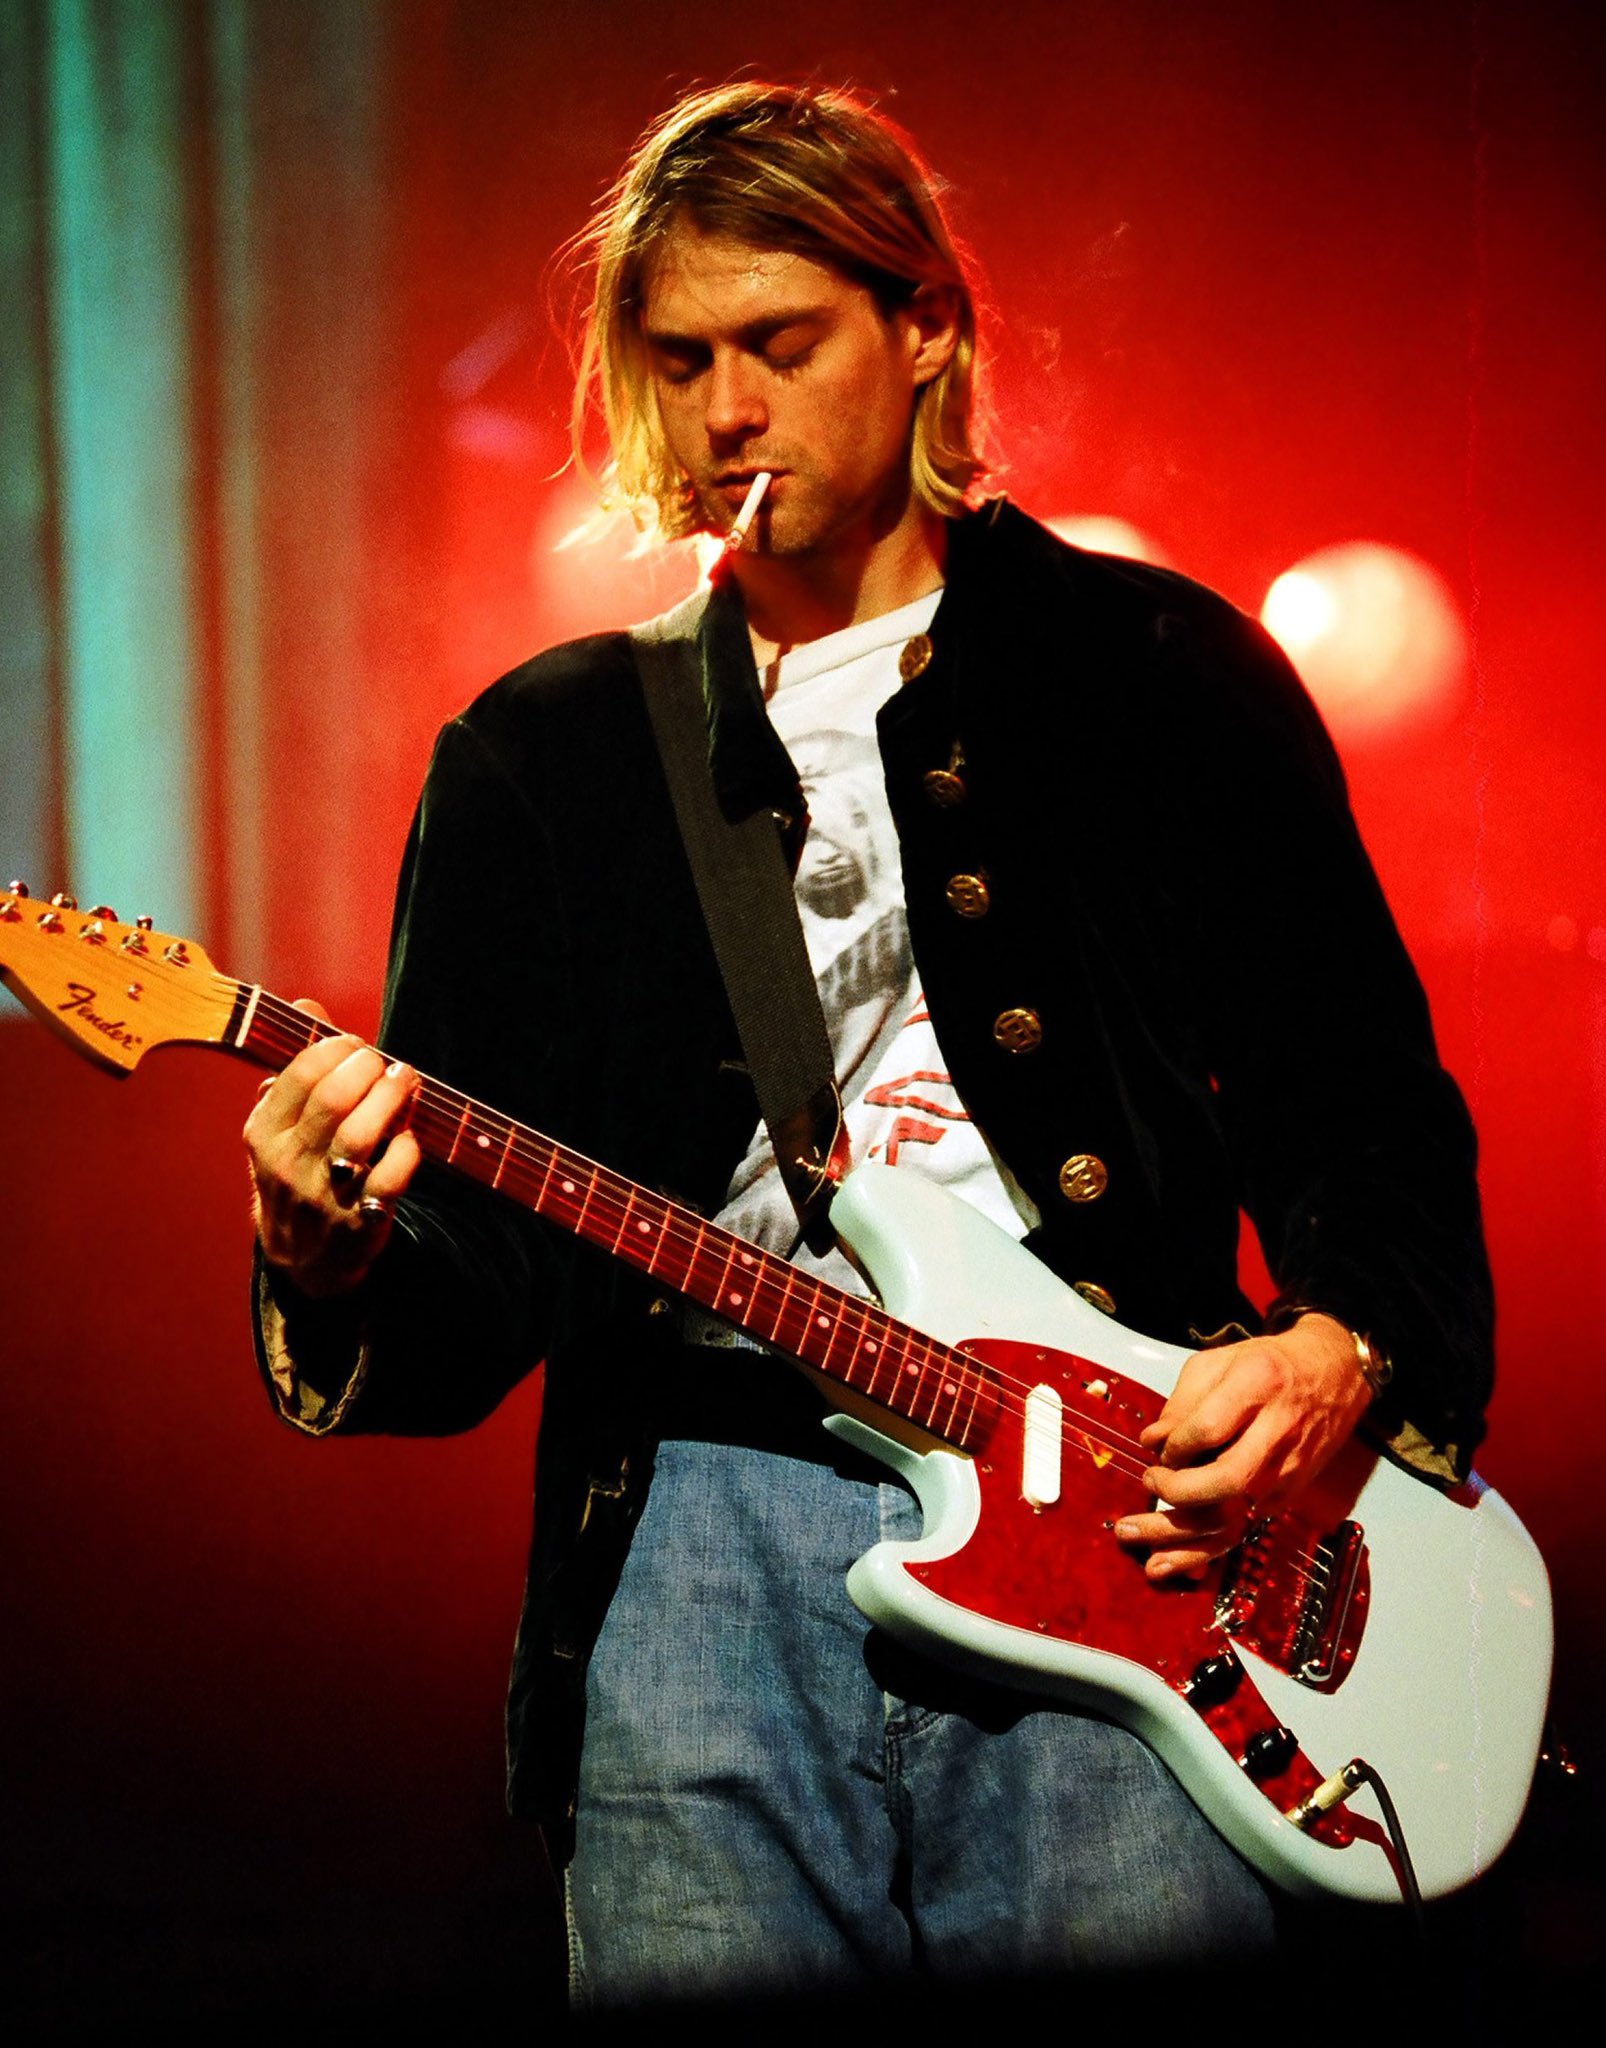 Happy birthday to the one and only Kurt Cobain thank you for everything 